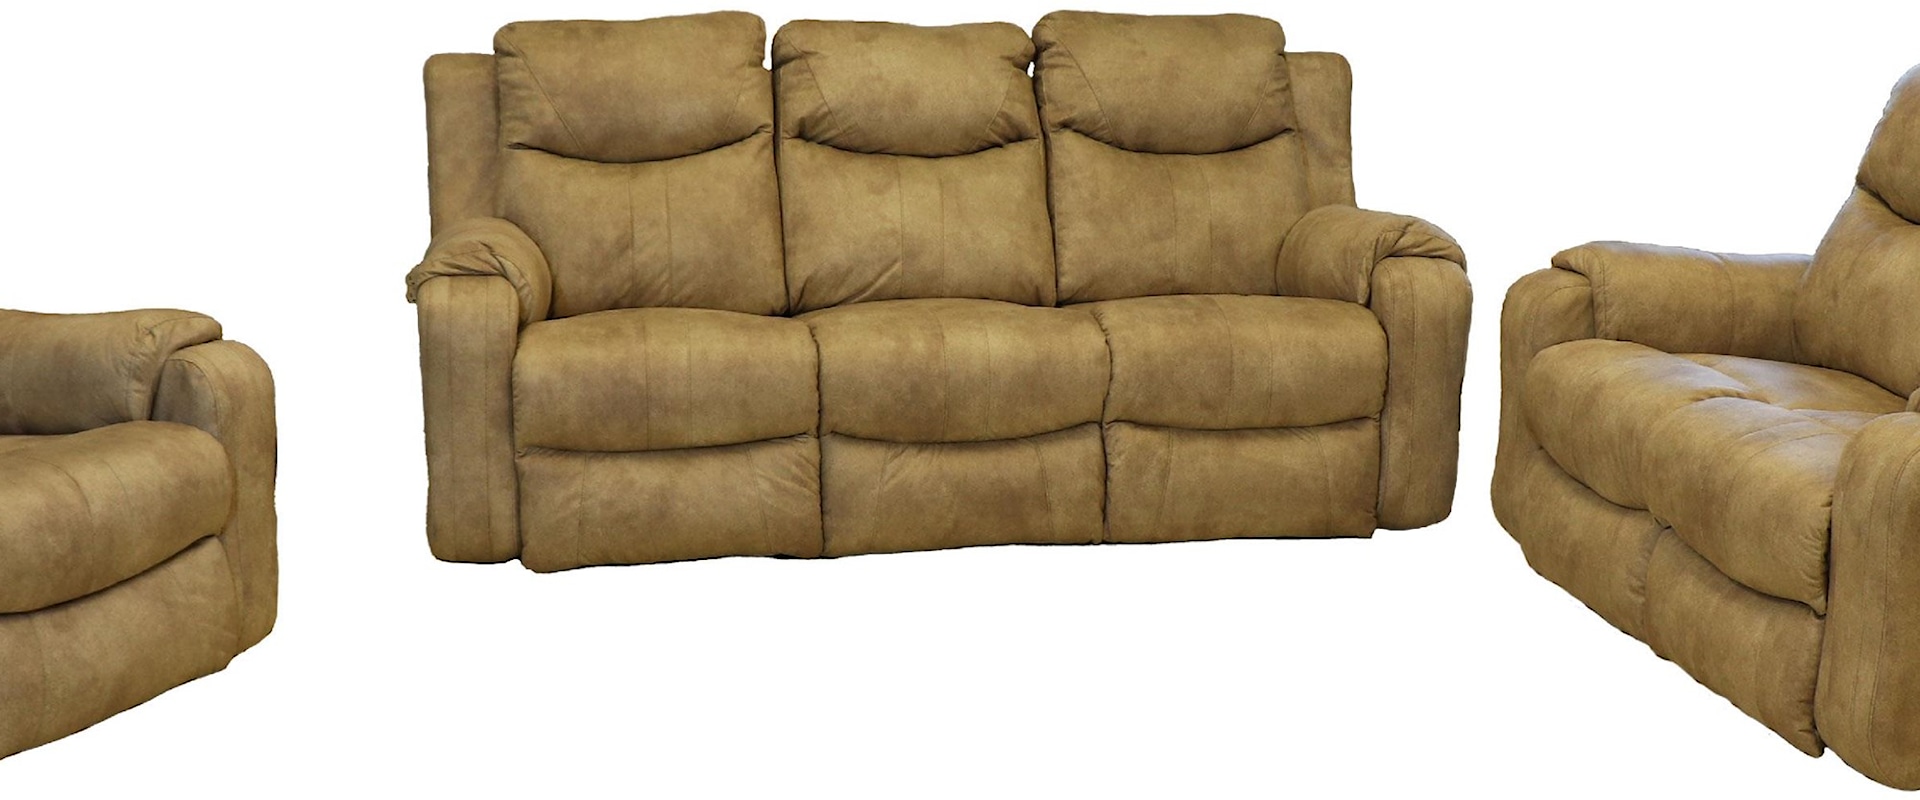 3pc Power Reclining Sofa, Loveseat, and Recliner with Adjustable Headrest